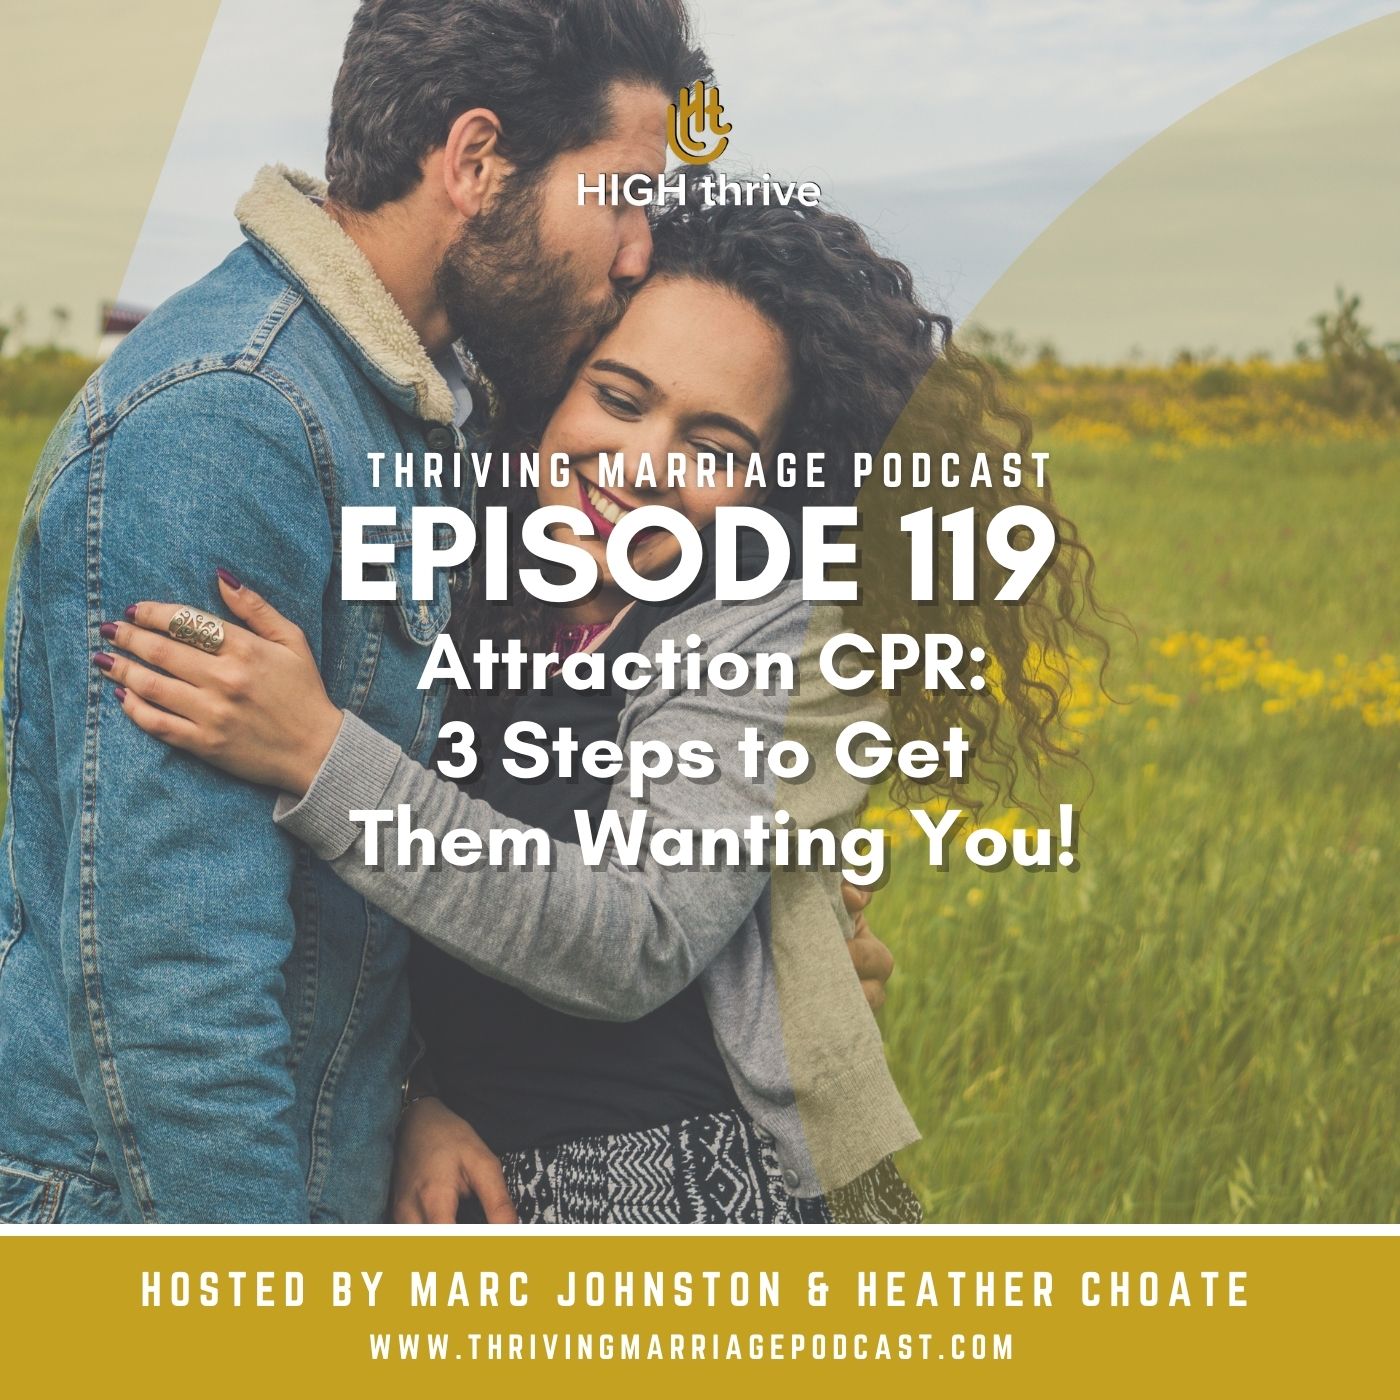 Episode 119: Attraction CPR 3 Steps to Get Them Wanting You!